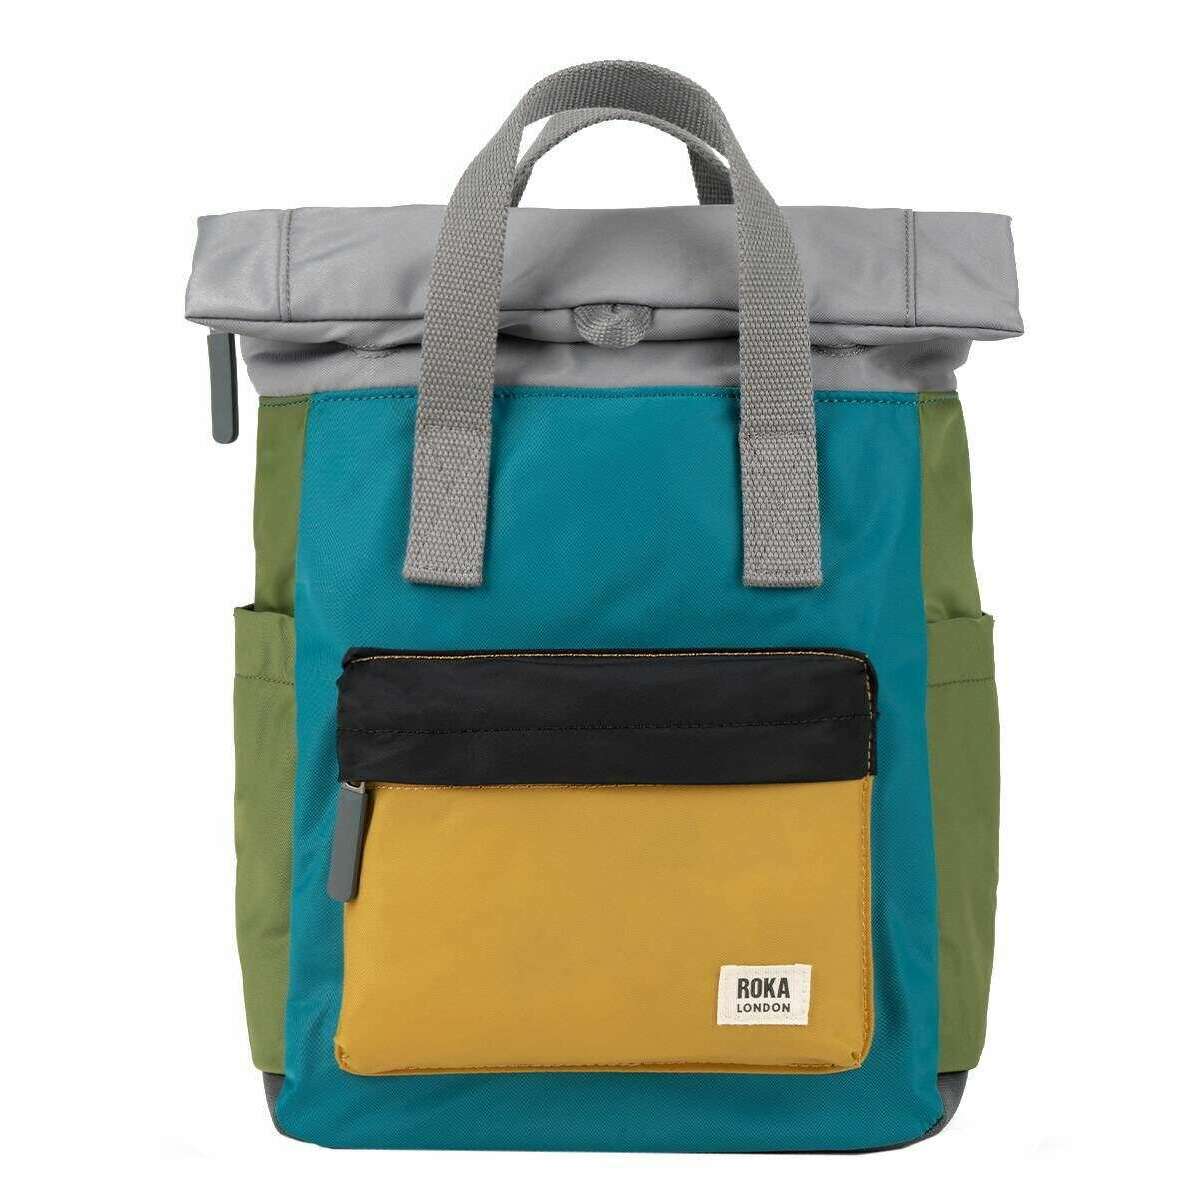 Roka Canfield B Small Creative Waste Colour Block Recycled Nylon Backpack - Blue/Grey/Yellow